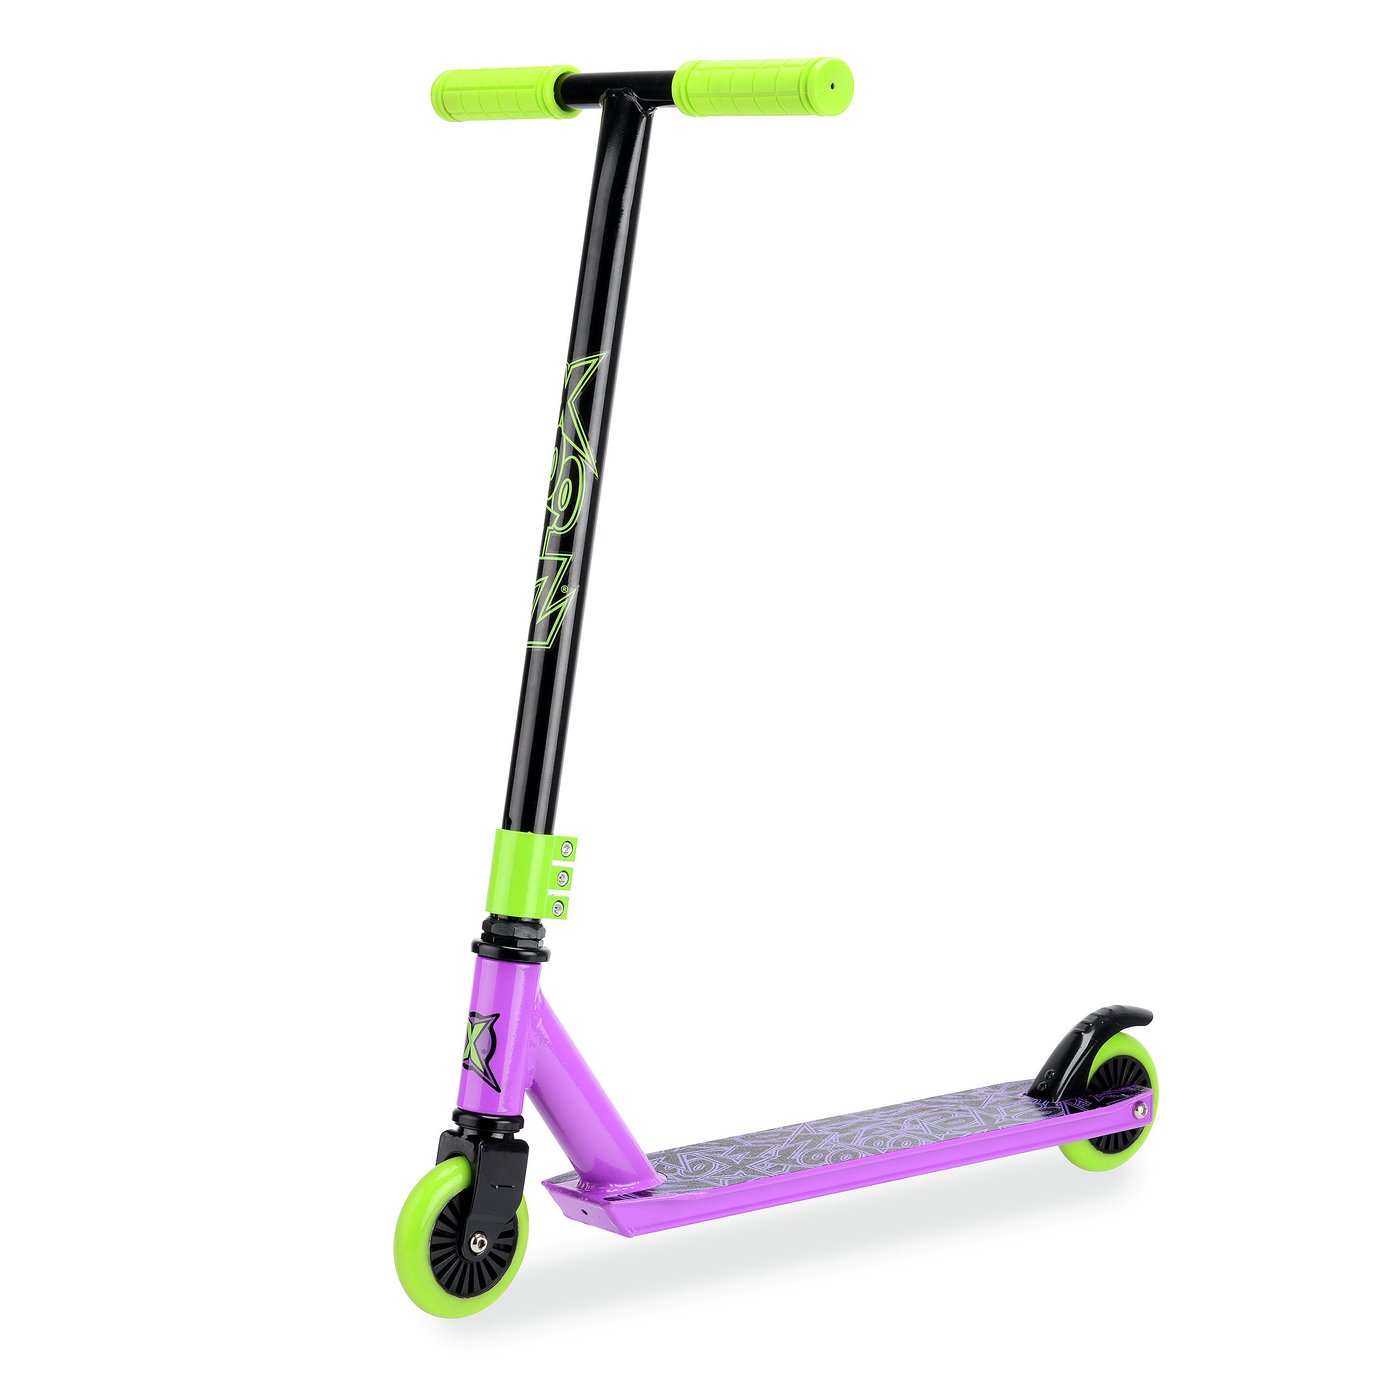 Xoo Stunt Scooter Review